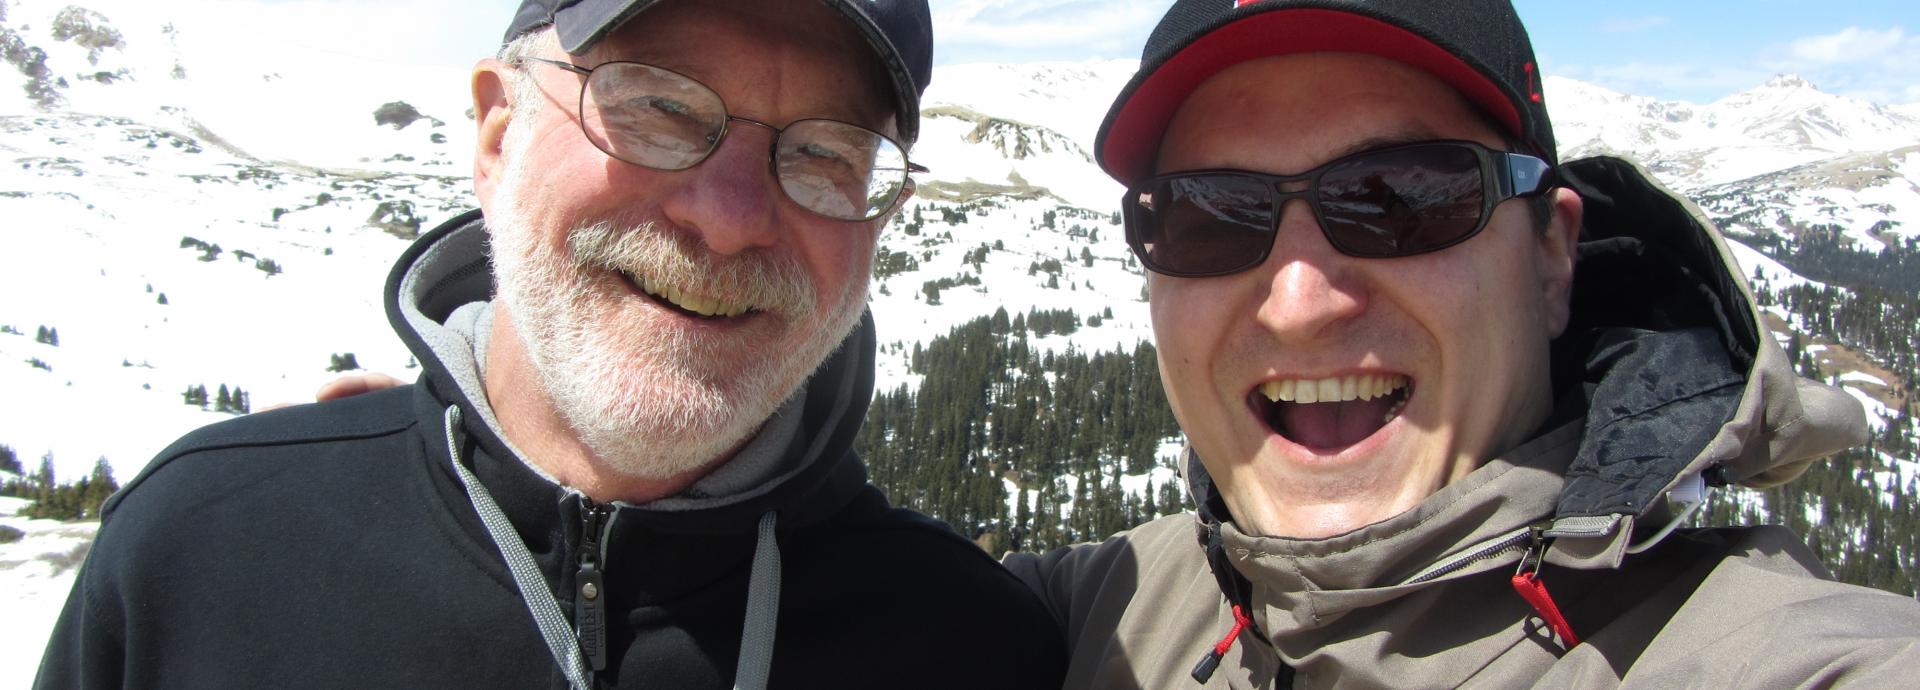 Fulbrighters Micheal H. Epstein and Erkko Sointu taking selfie on a top of a mountain, Loveland Pass in Colorado. It's sunny day, Erkko is wearing sun glasses and both of them are smiling widely to the camera.